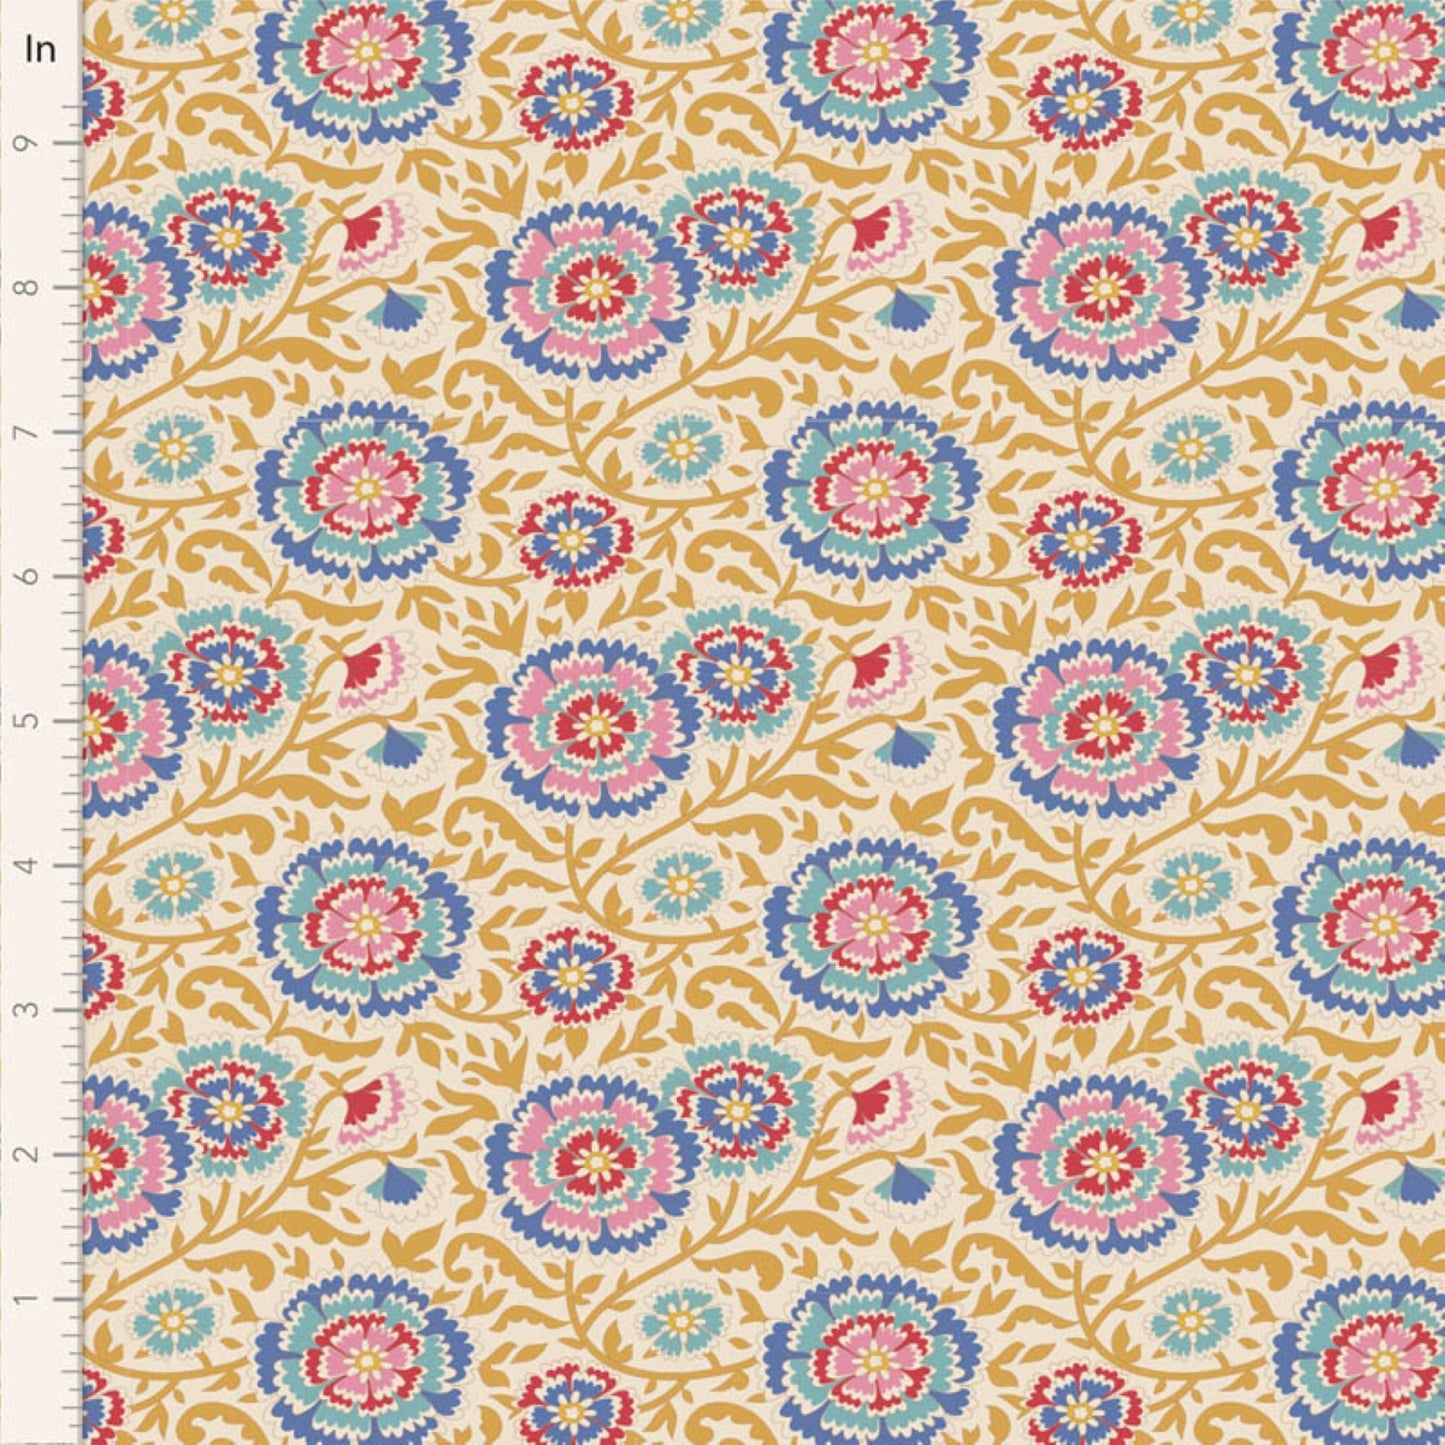 Tilda Jubilee and Farm Flowers floral mustard yellow and pink bundle 7 Fat 16's cotton quilt fabric